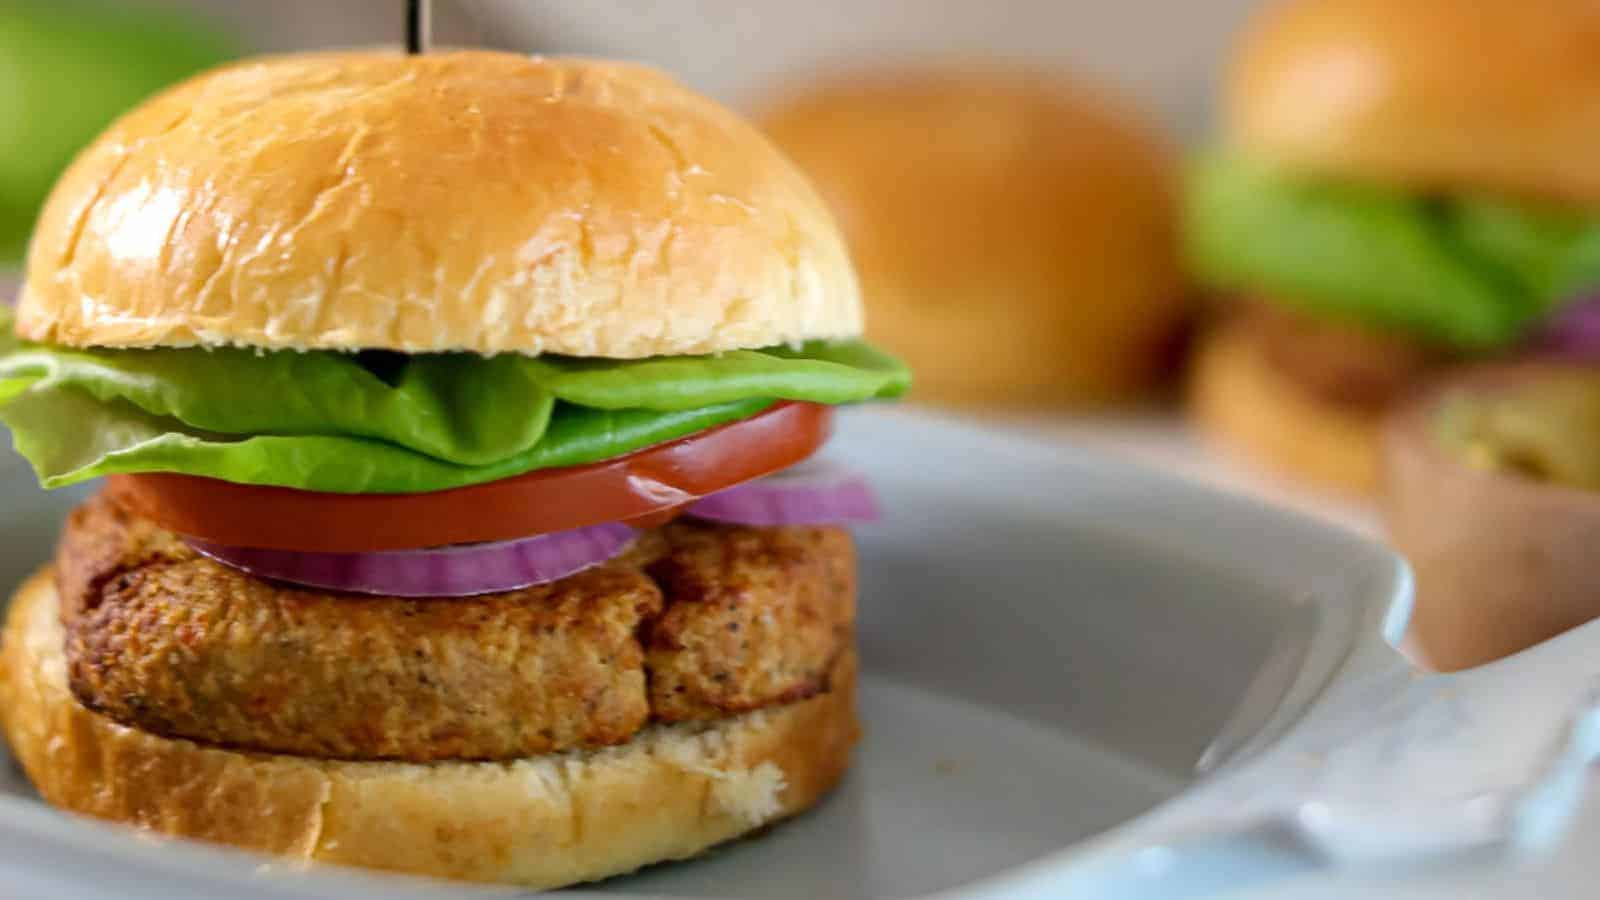 Tuna burger with lettuce, tomato, and onion on a bun, served on a white plate.